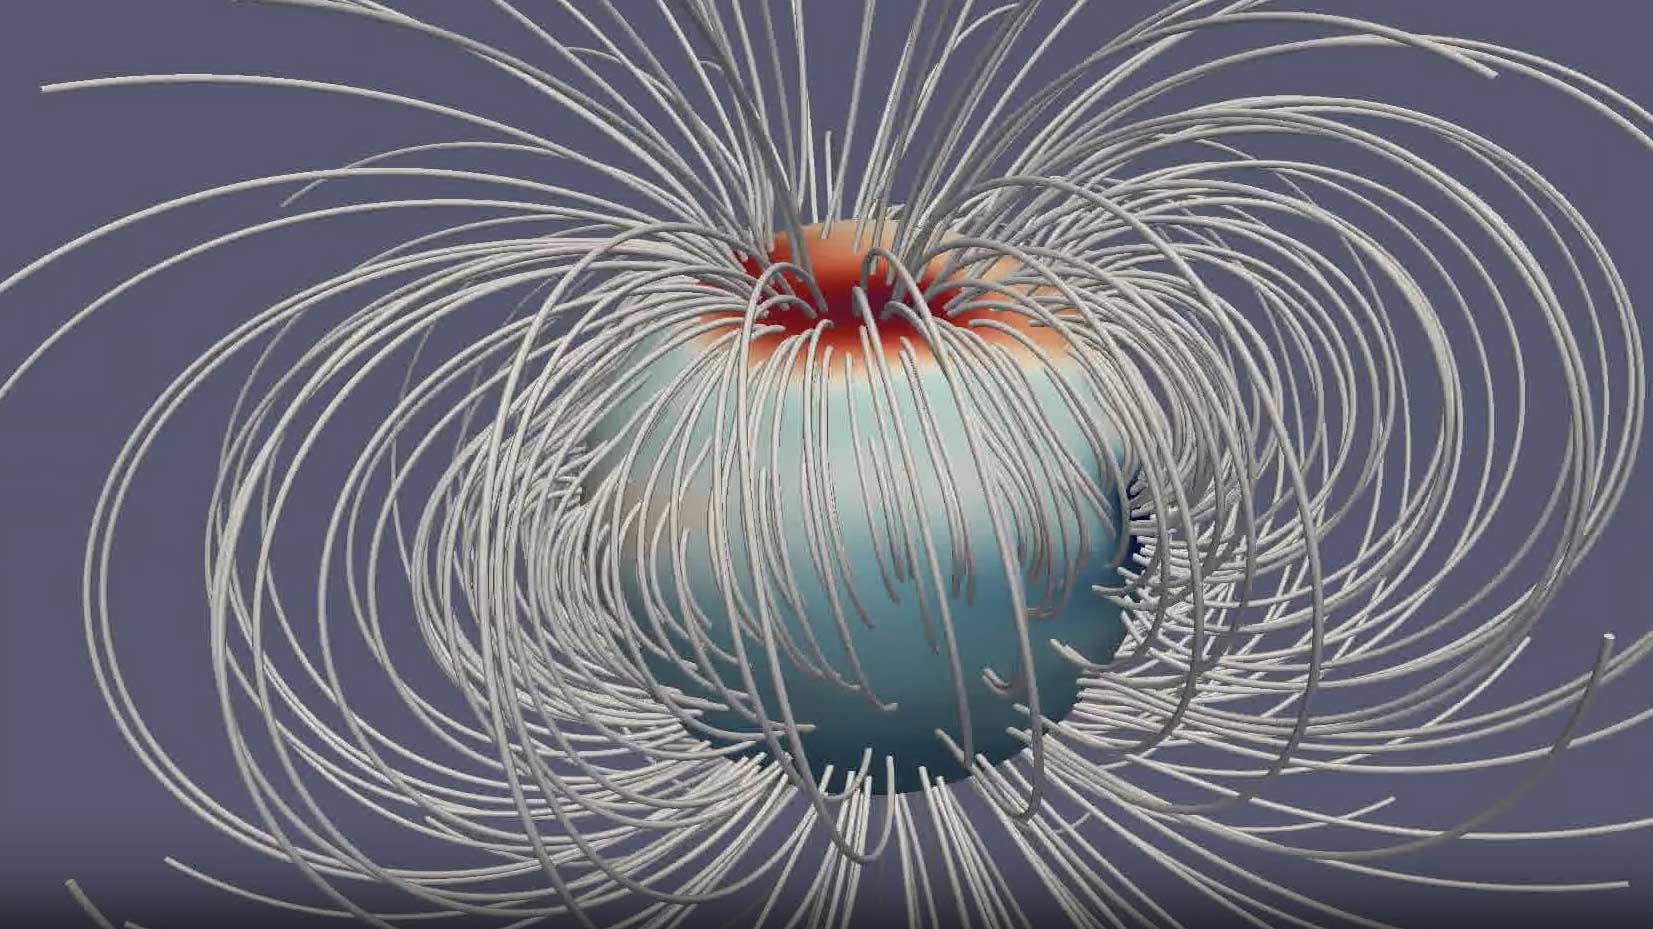 Illustration of a magnetic field. It shows a round blue and red ball with curved spikes around it.